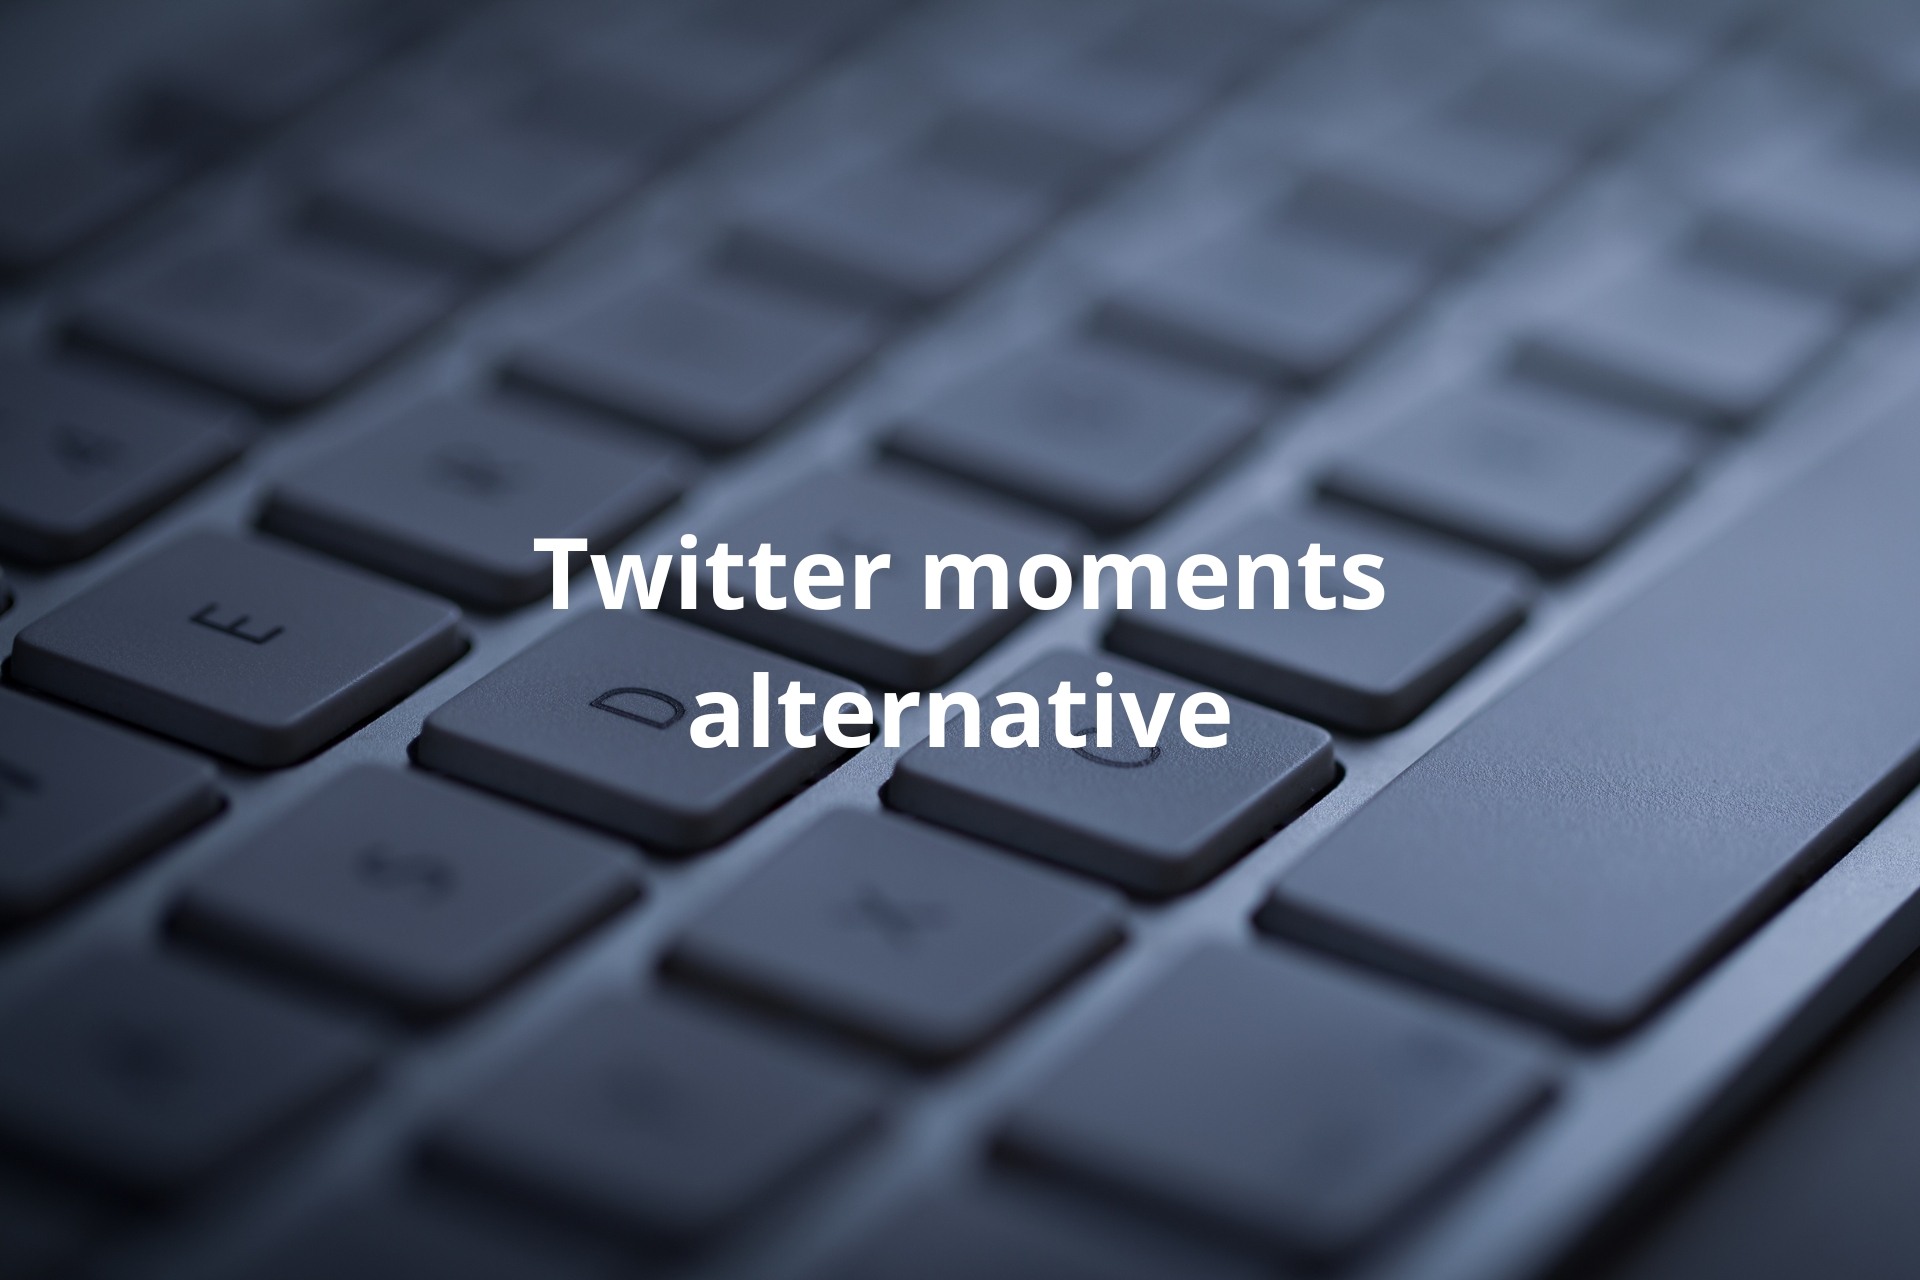 Twitter moments alternative - wakelet collections